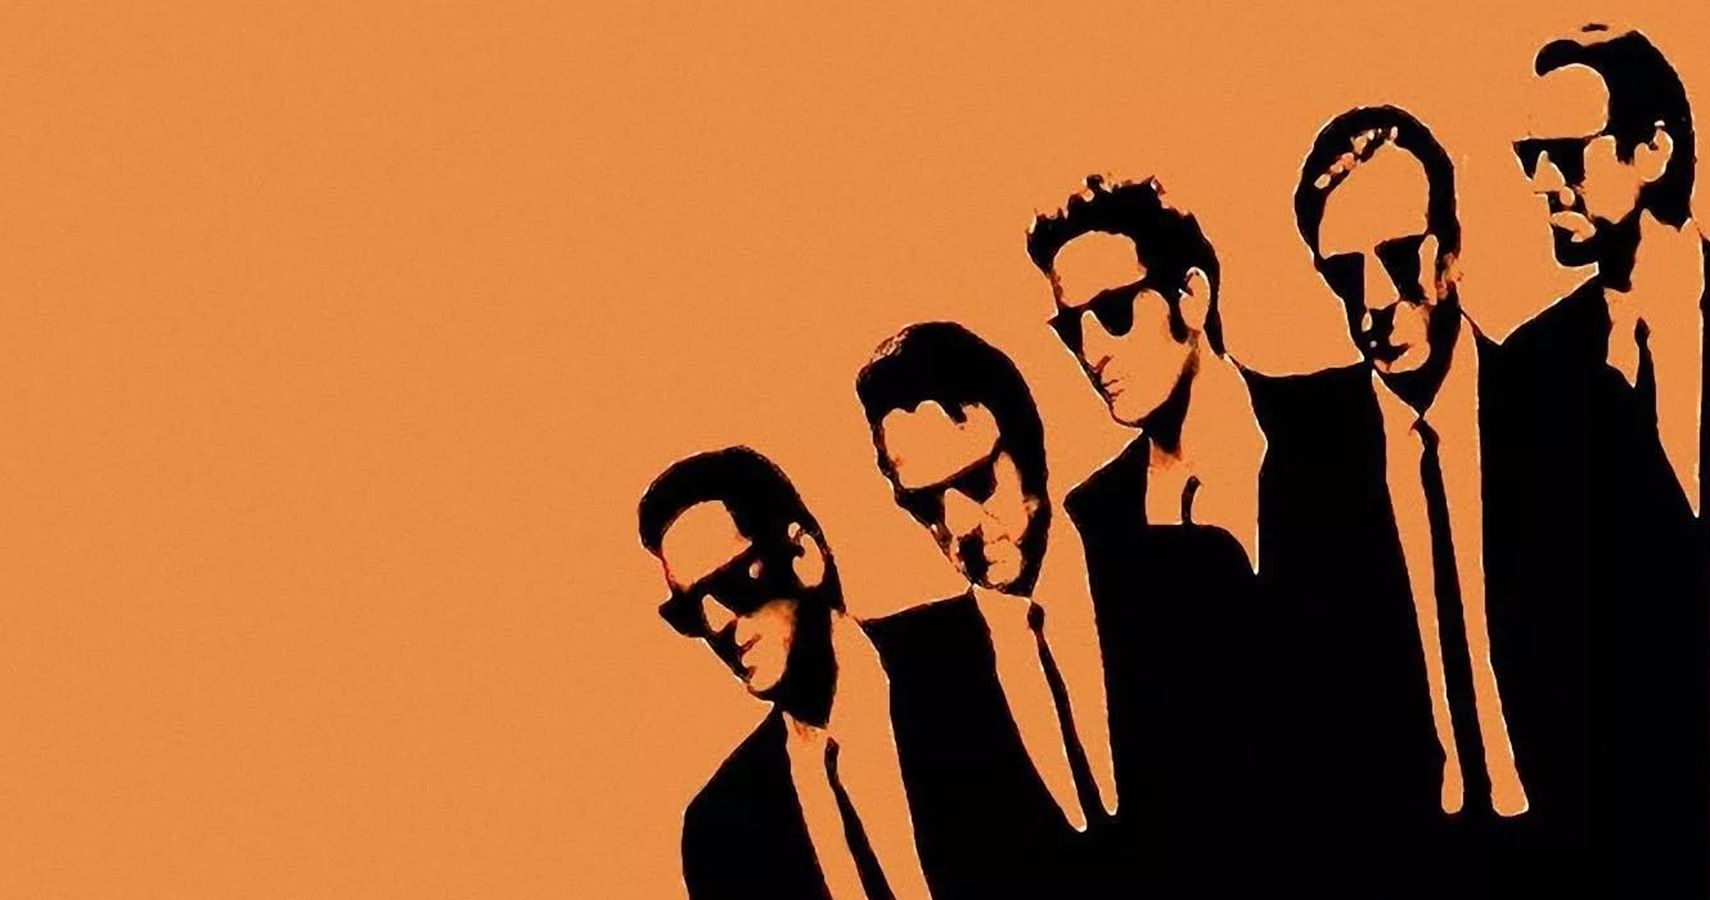 Reservoir Dogs: Every Major Performance, Ranked